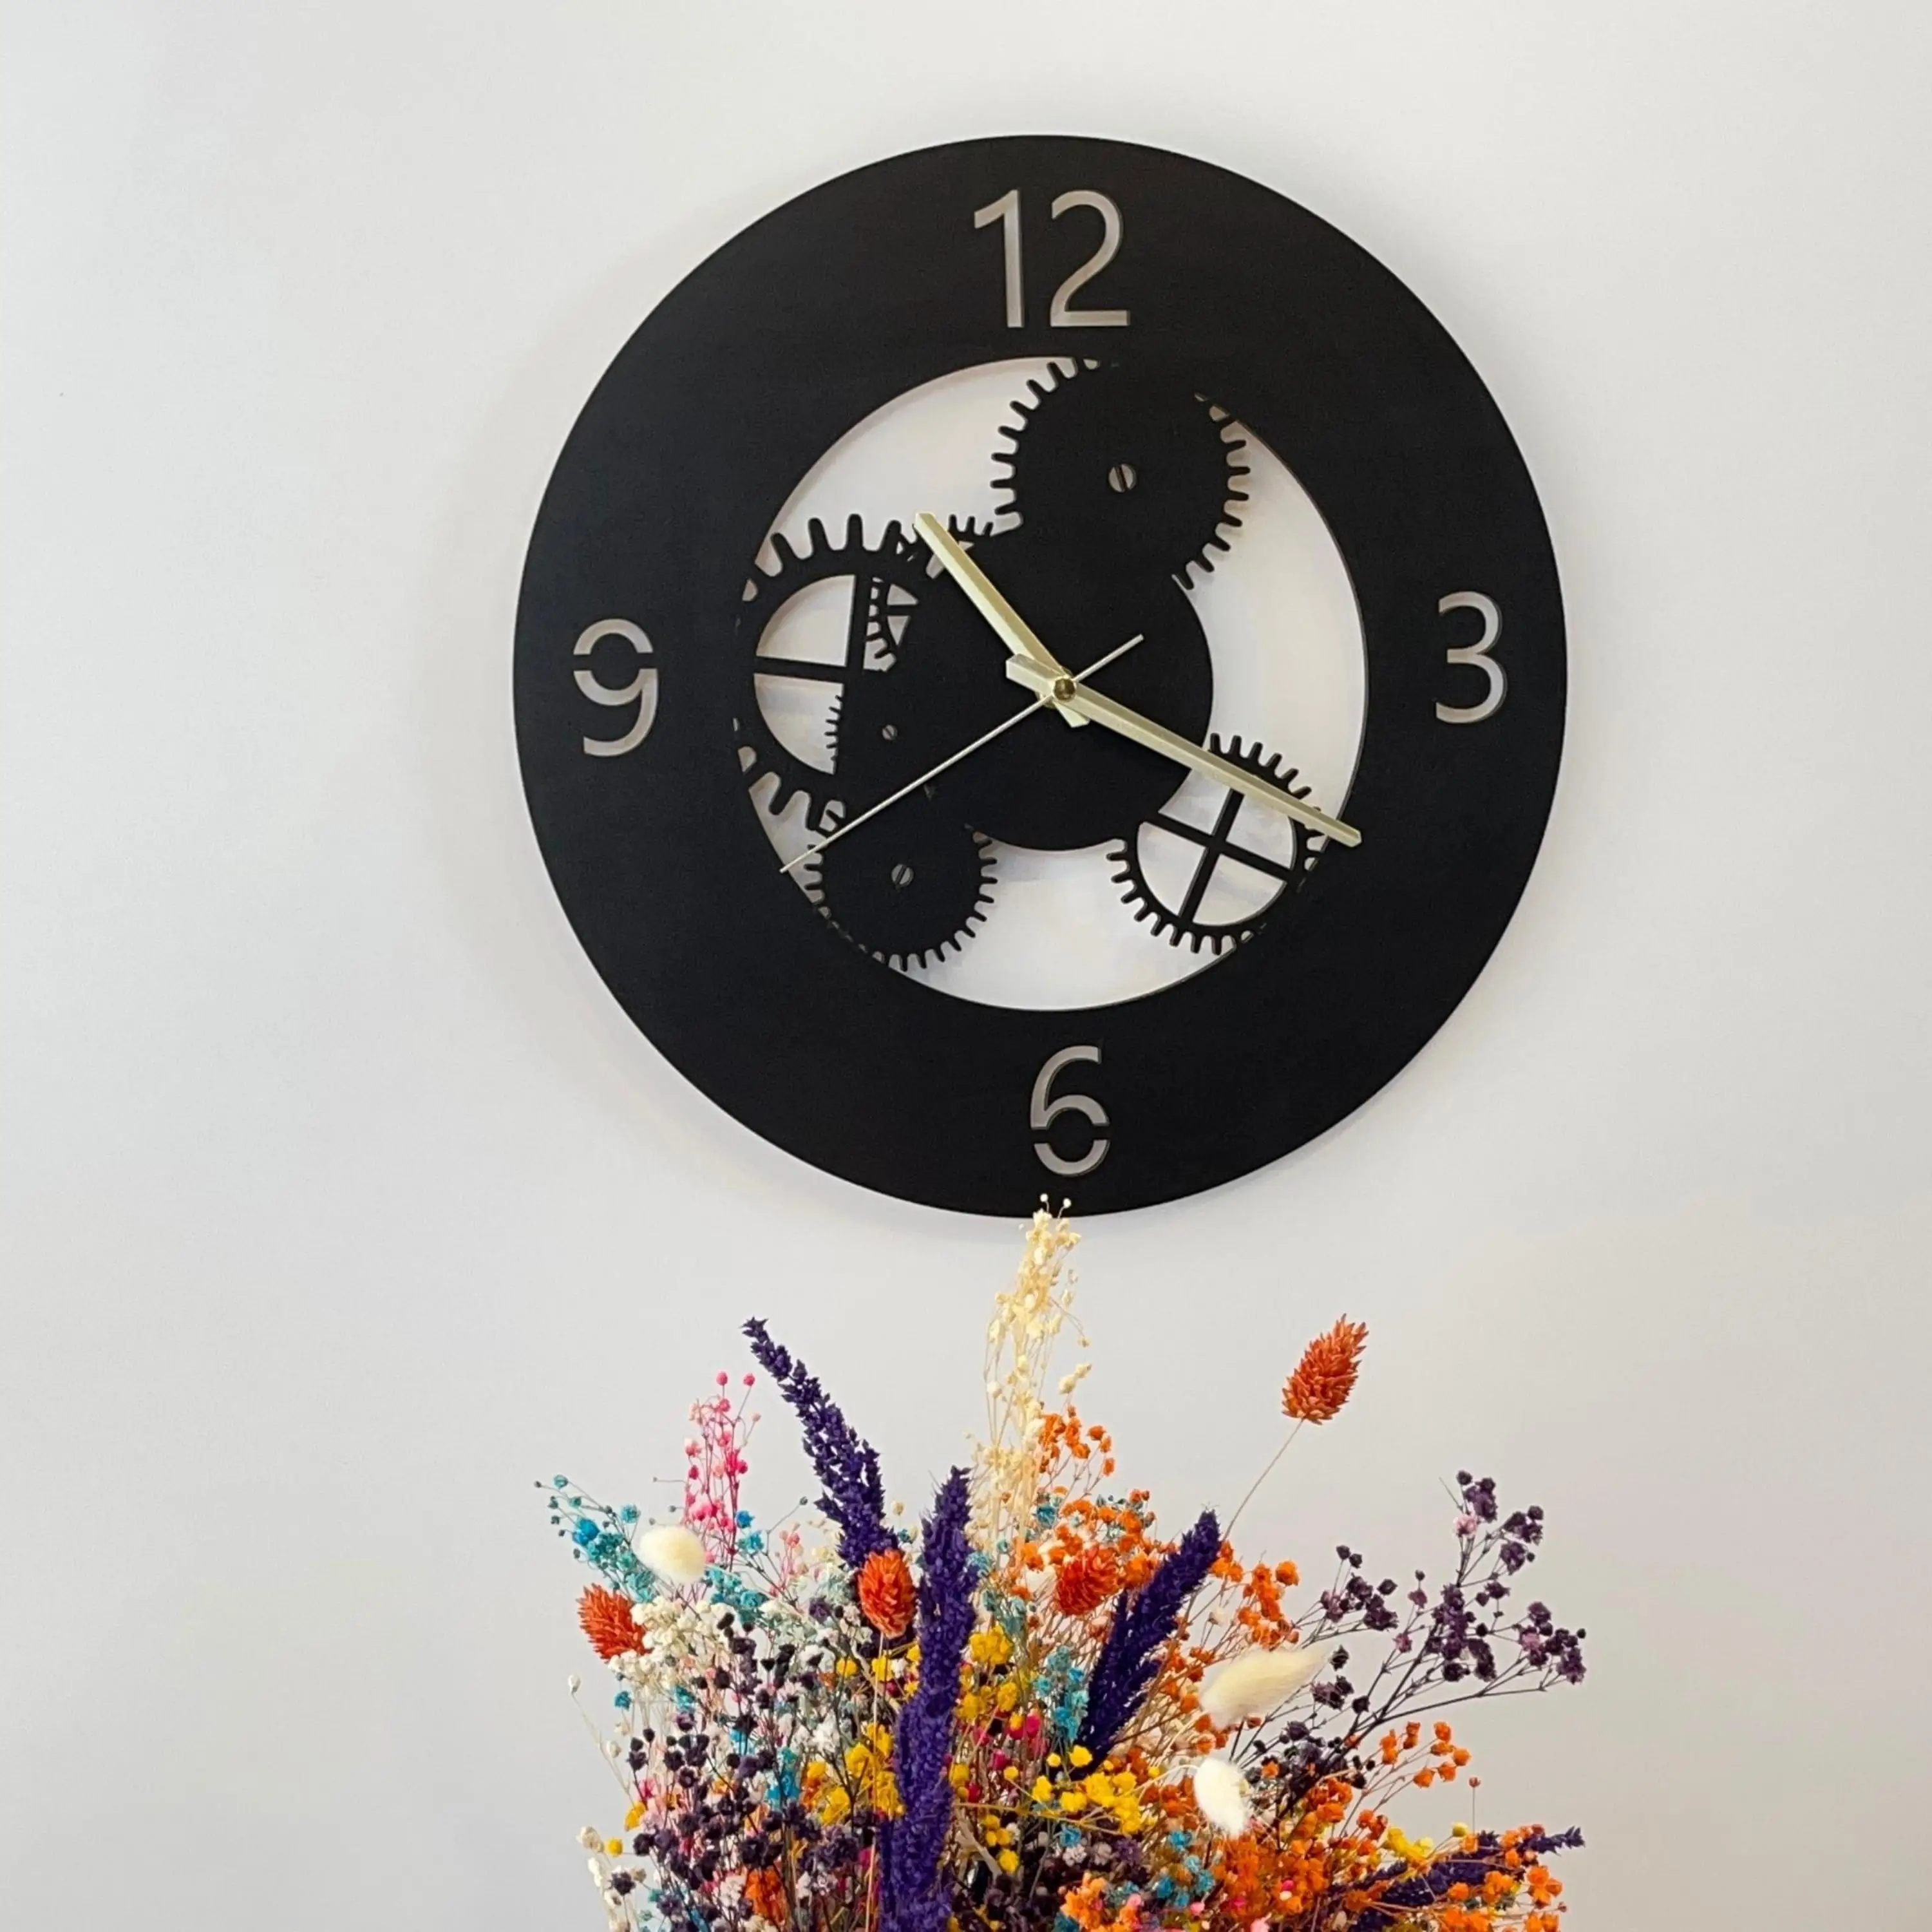 

Wooden Wall Clock Decorative Time Wheel Silent And Gold Color Mechanism Home Office Living Room Quality Gift Ideas Watch Modern Art Design Style Hour Timer Kitchen New Creative Stylish Ornament Classic Beautiful Cute